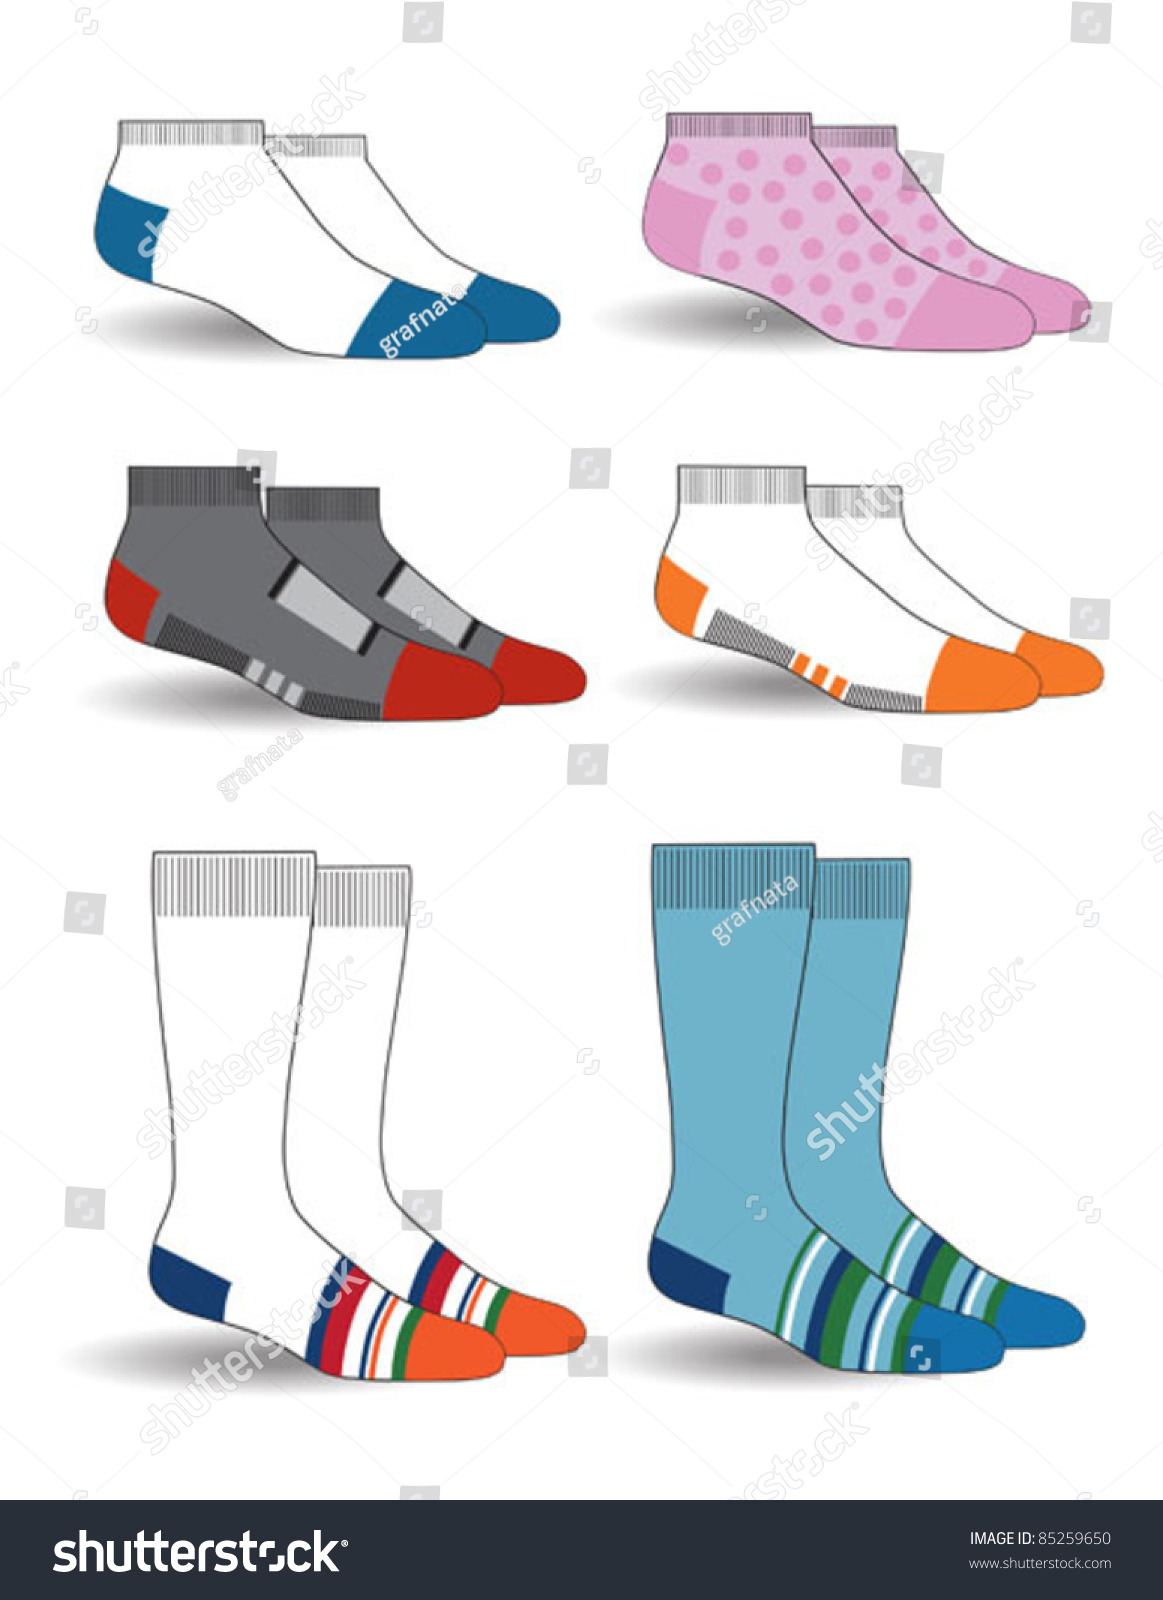 Illustration With Colorful Socks - 85259650 : Shutterstock